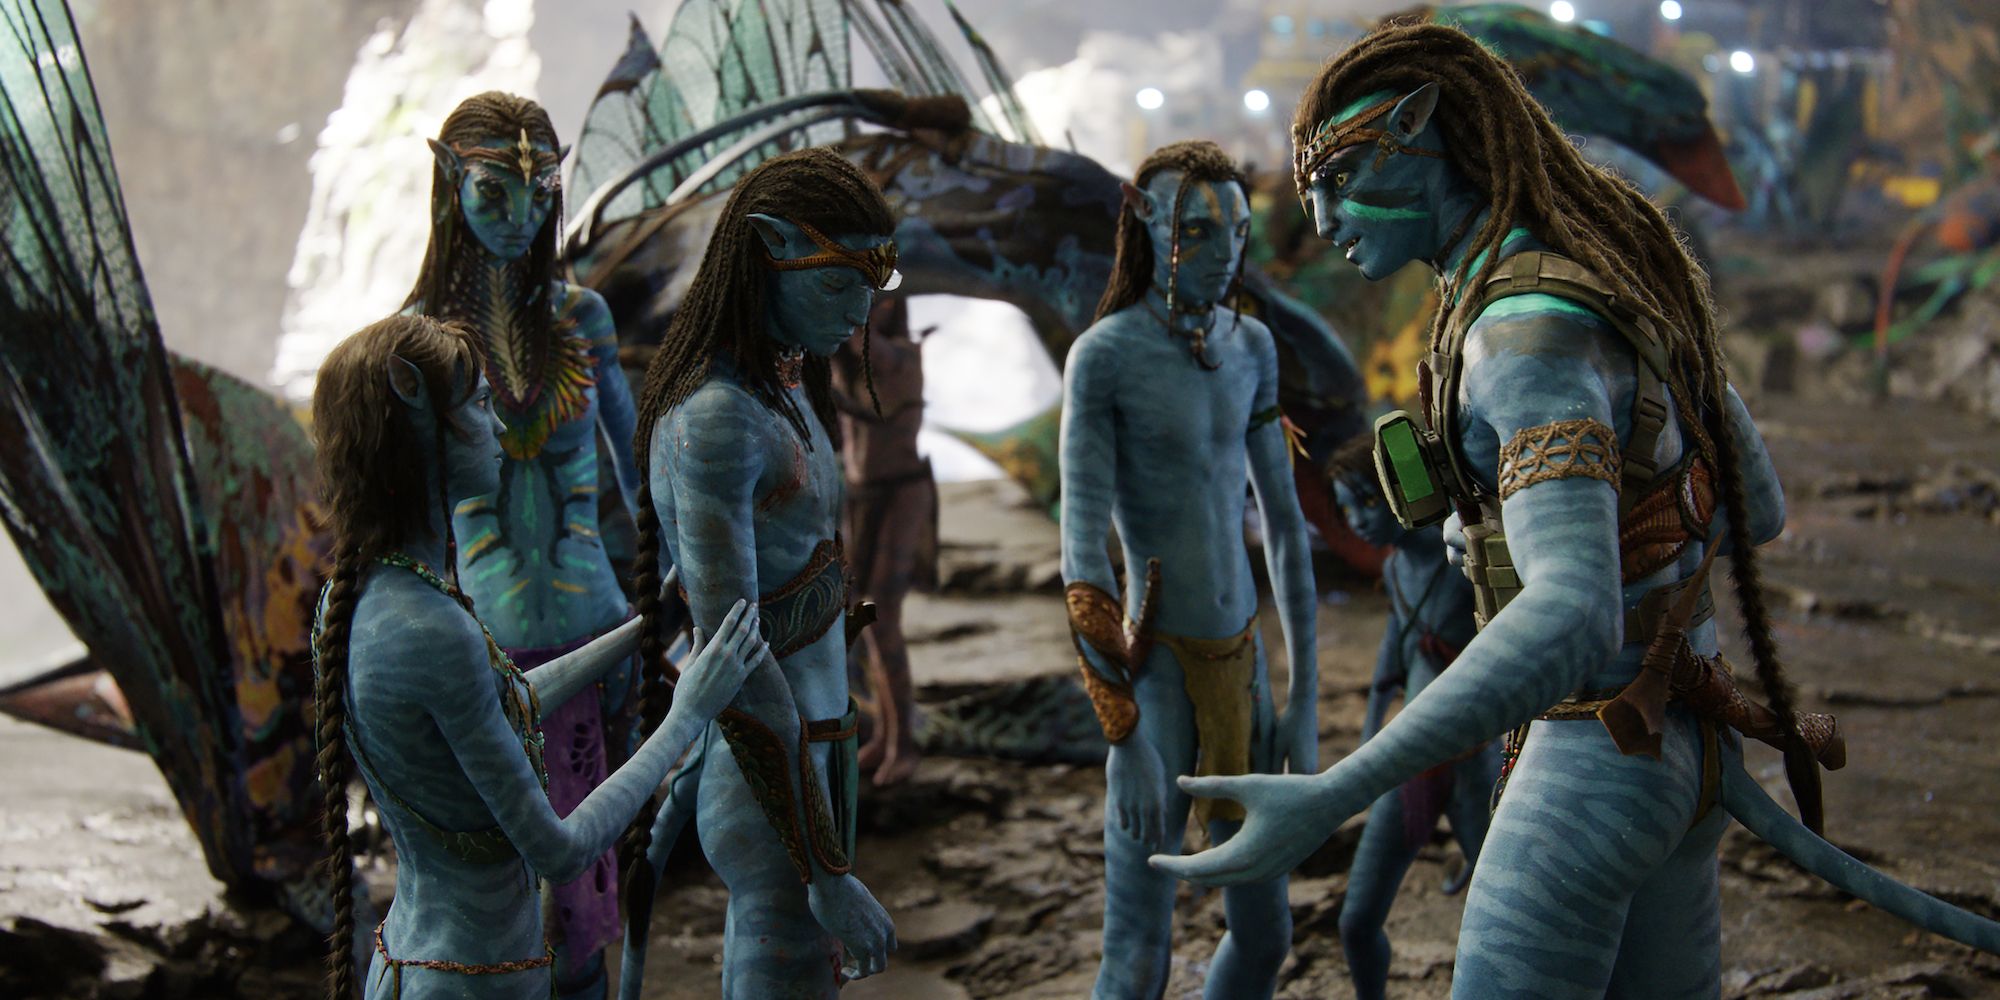 The Sully family in Avatar: The Way of Water.